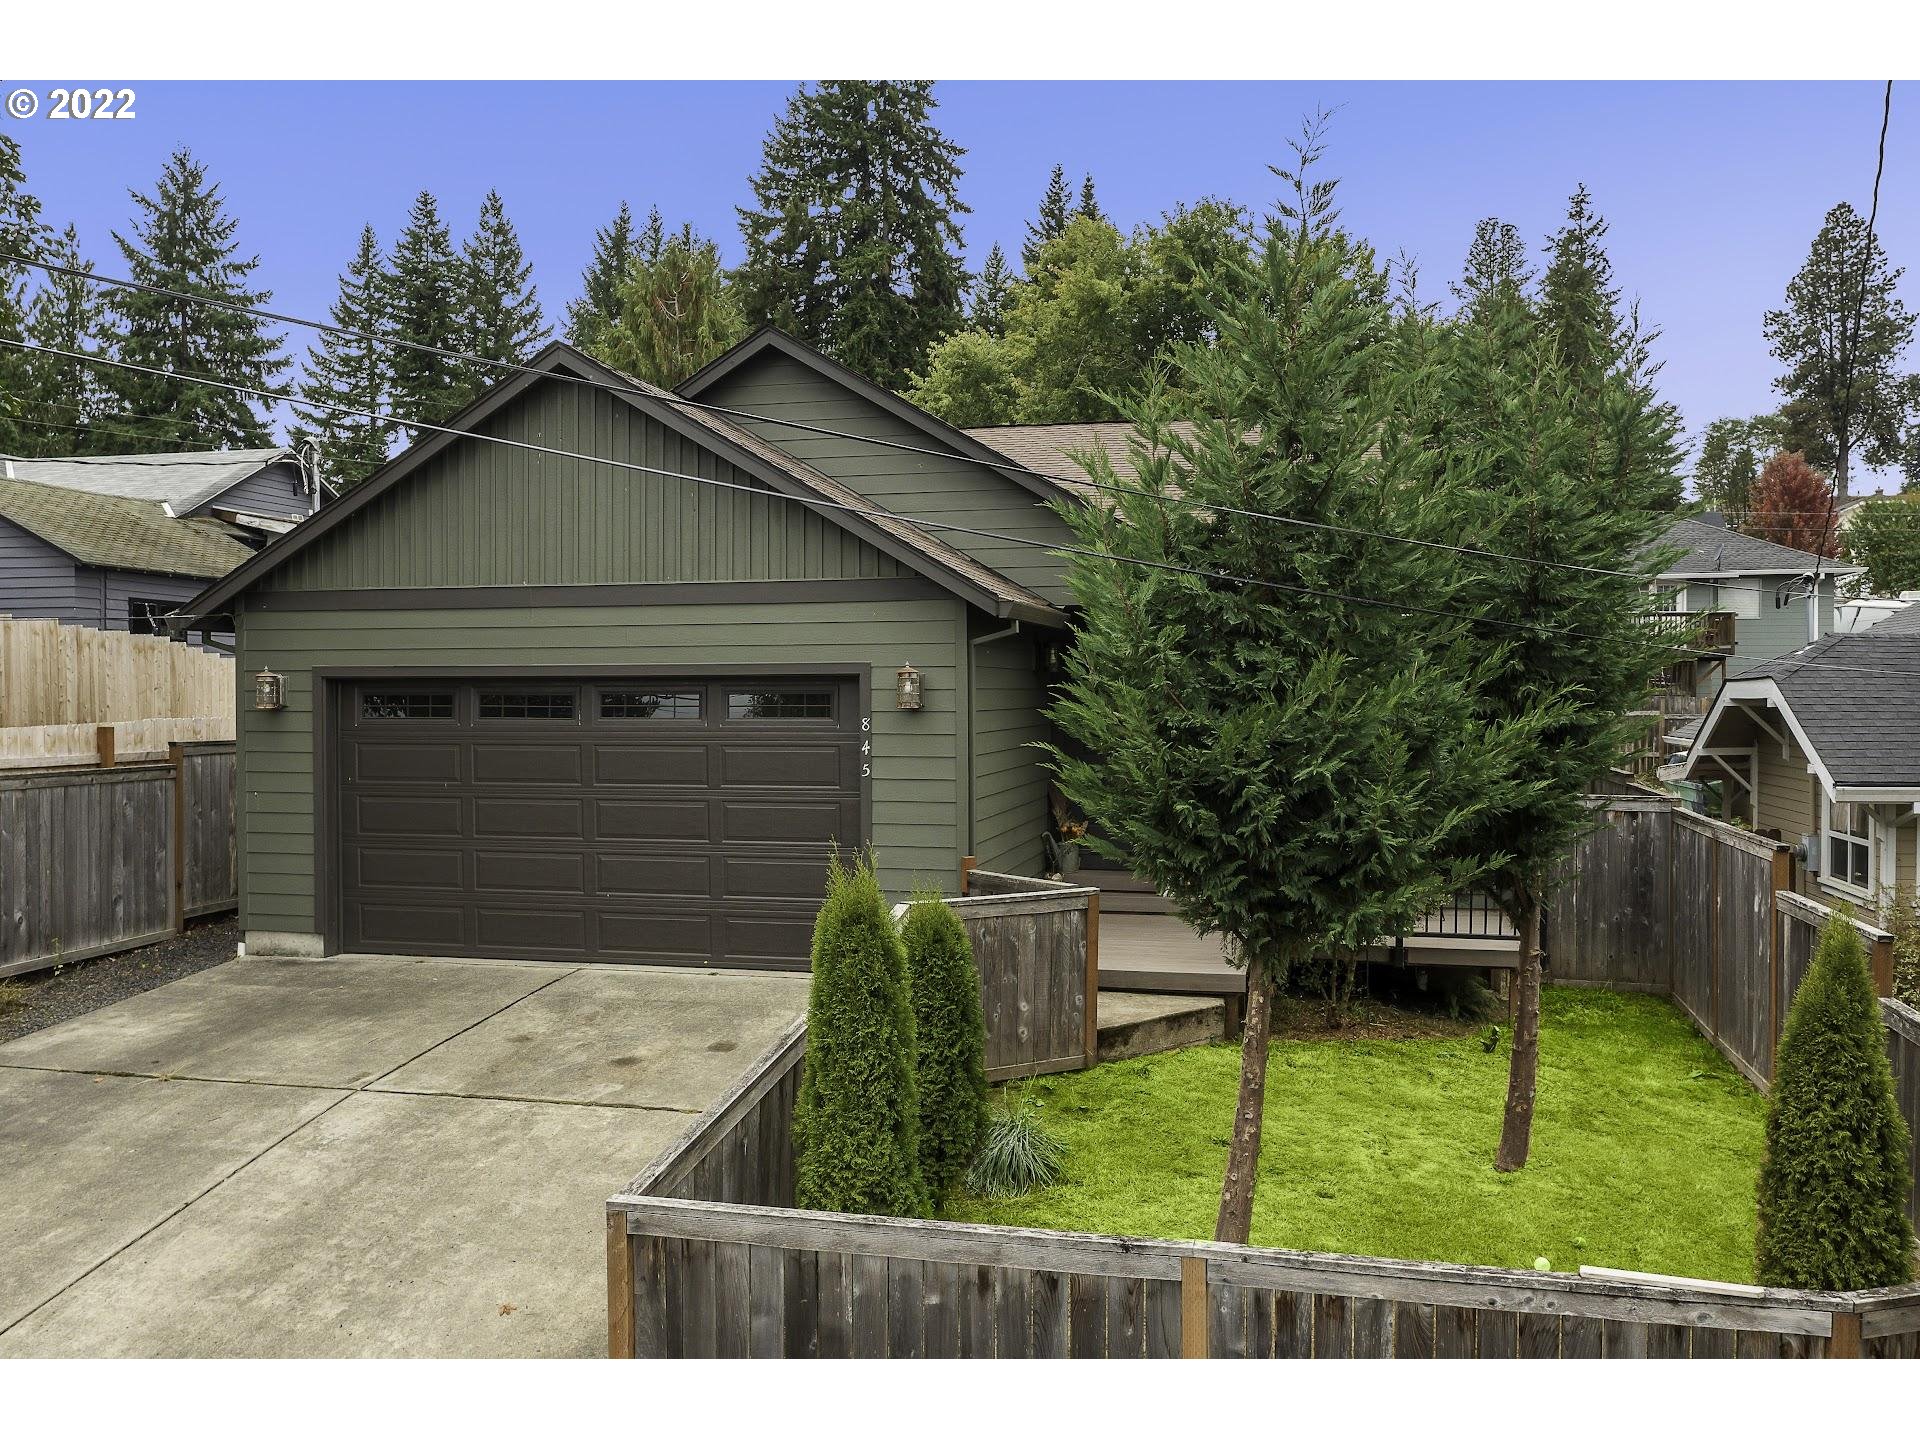 845 1ST AVE, Vernonia OR 97064